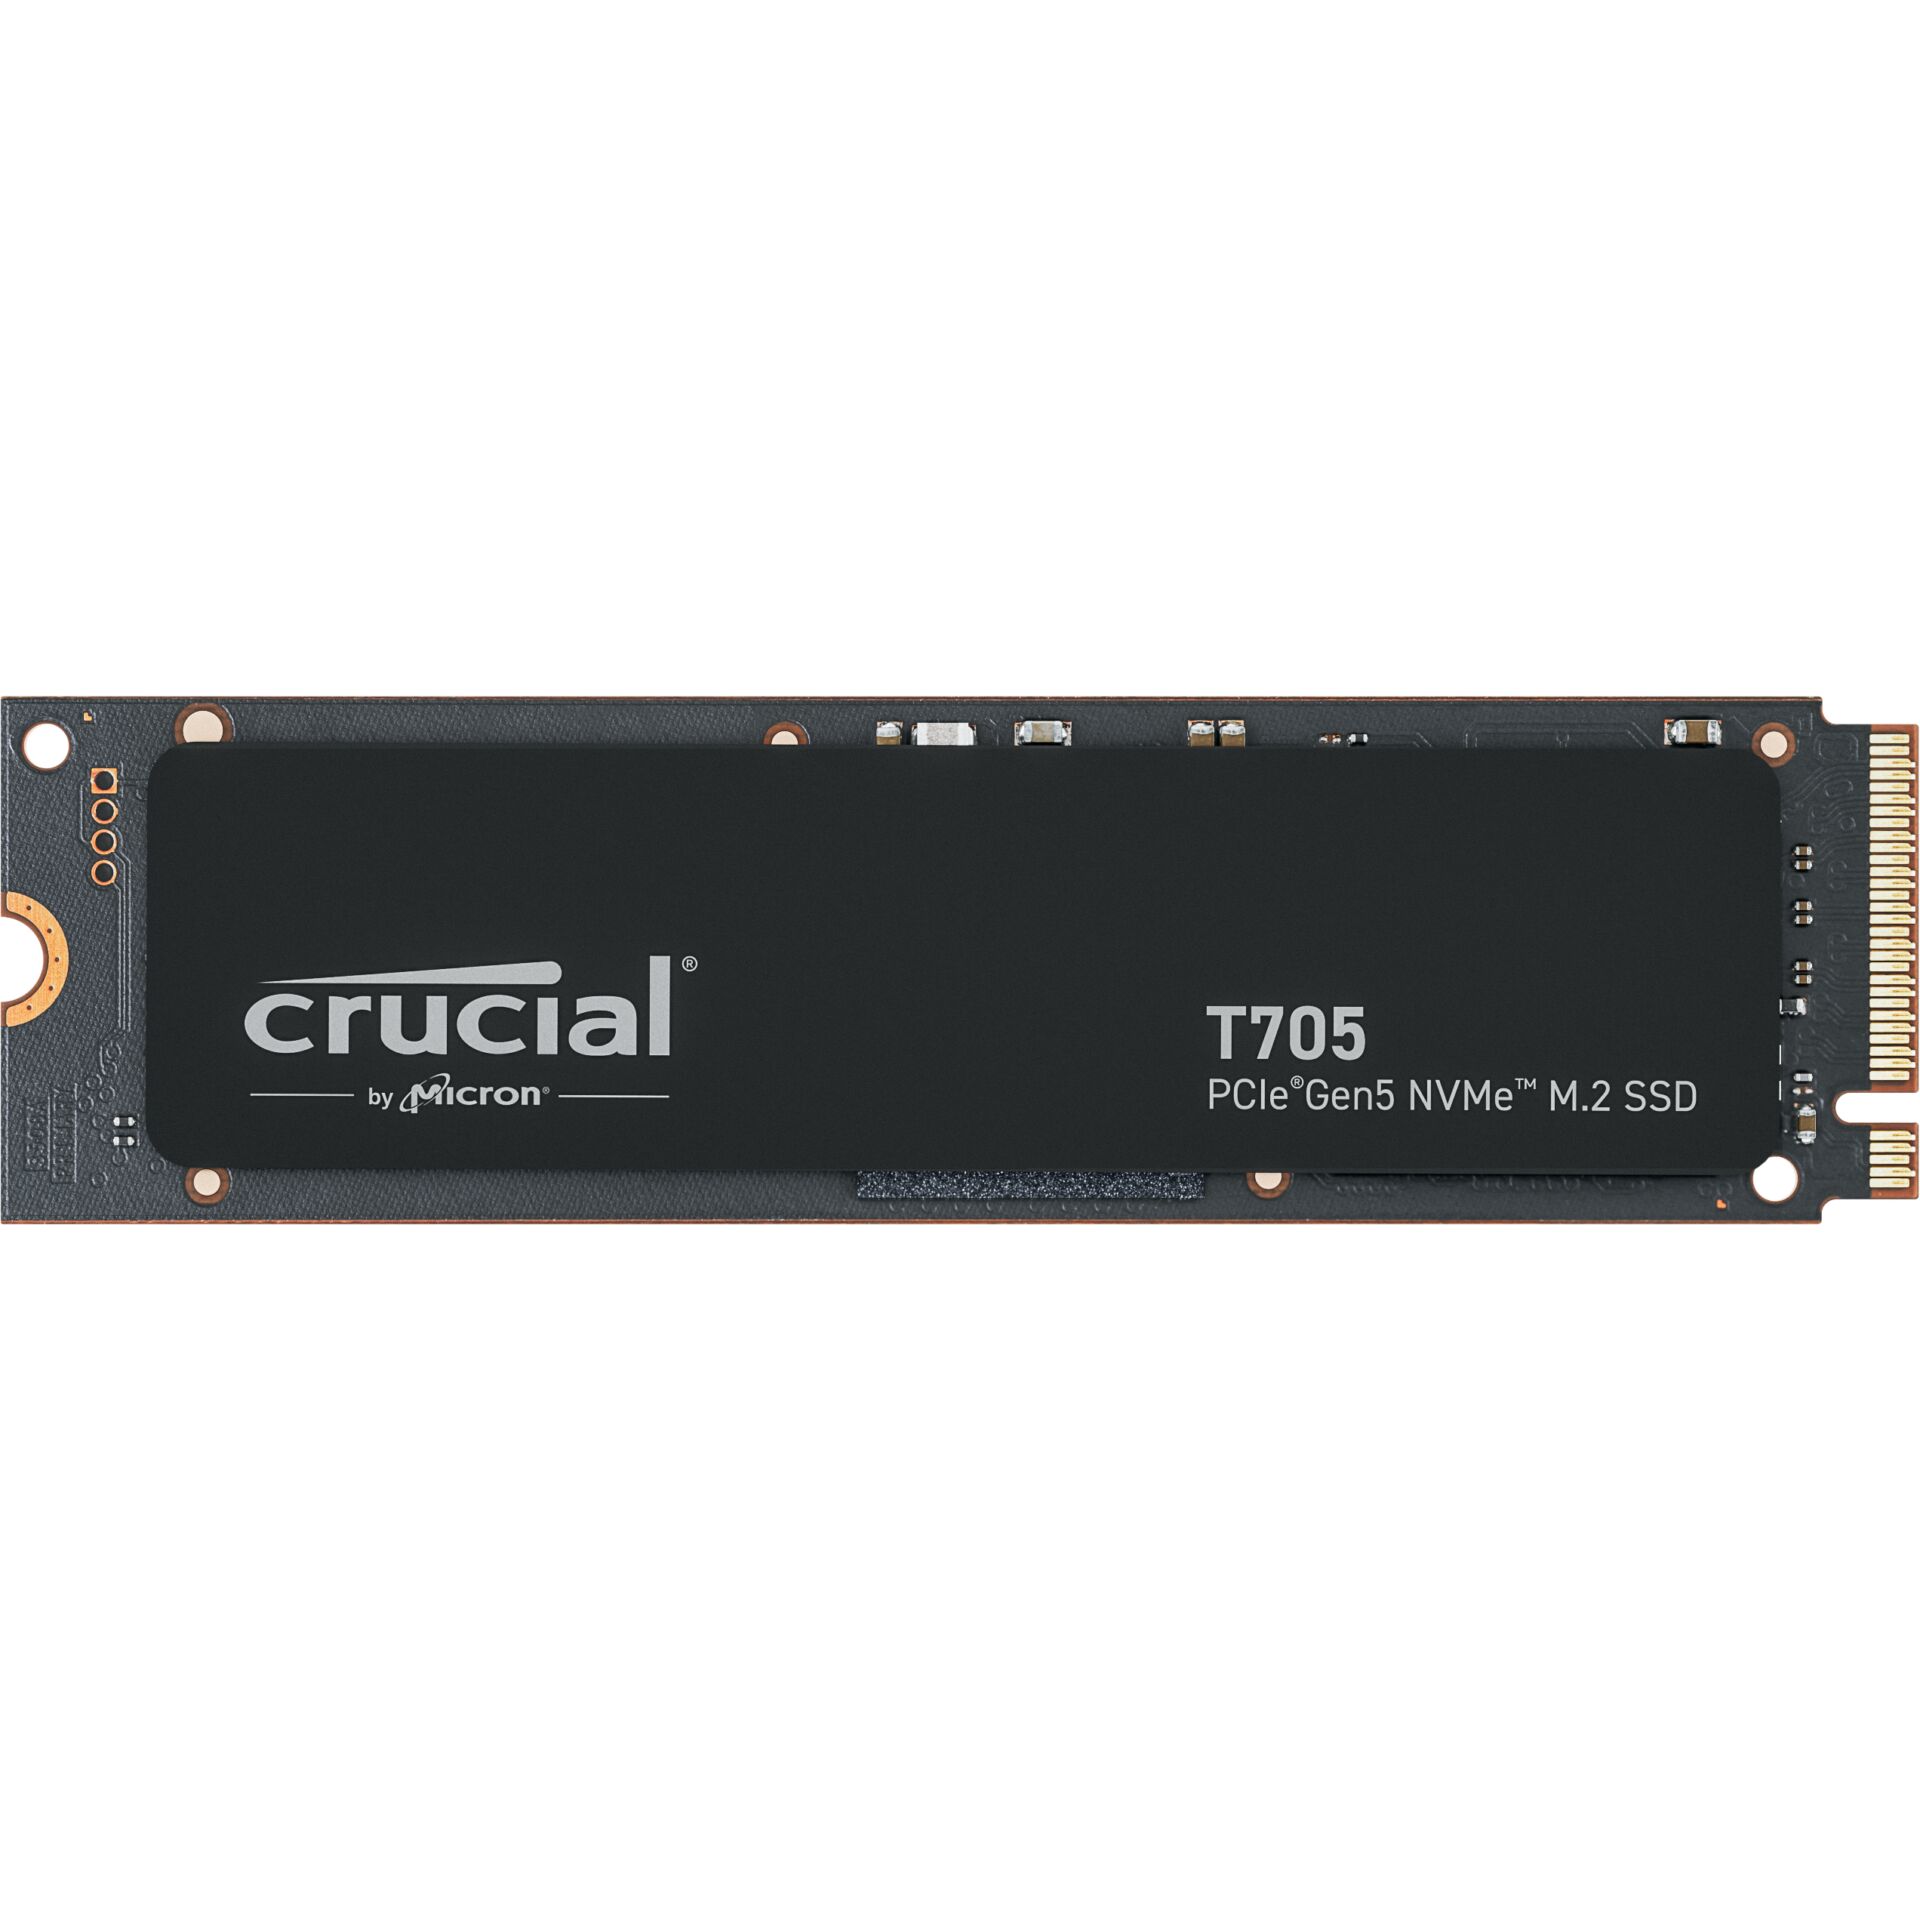 1.0 TB SSD Crucial T705 SSD, M.2/M-Key (PCIe 5.0 x4), lesen: 13600MB/s, schreiben: 10200MB/s SLC-Cached, TBW: 600T